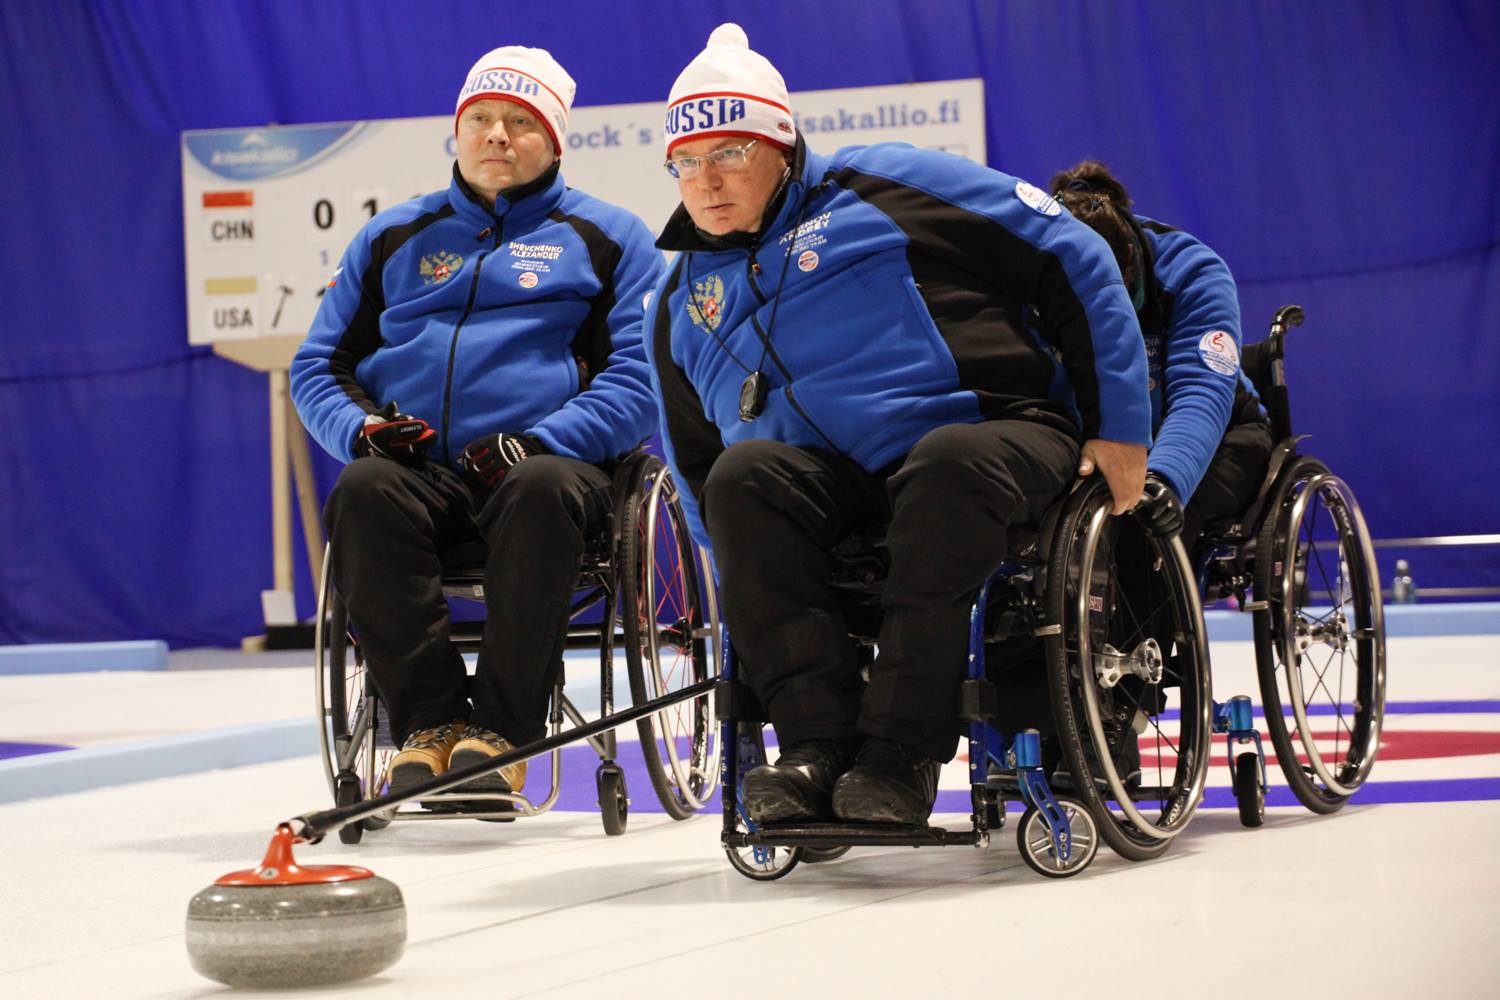 Russia remain the only undefeated team after five sessions of play at the World Wheelchair Curling Championship ©WCF/Alina Pavlyuchik